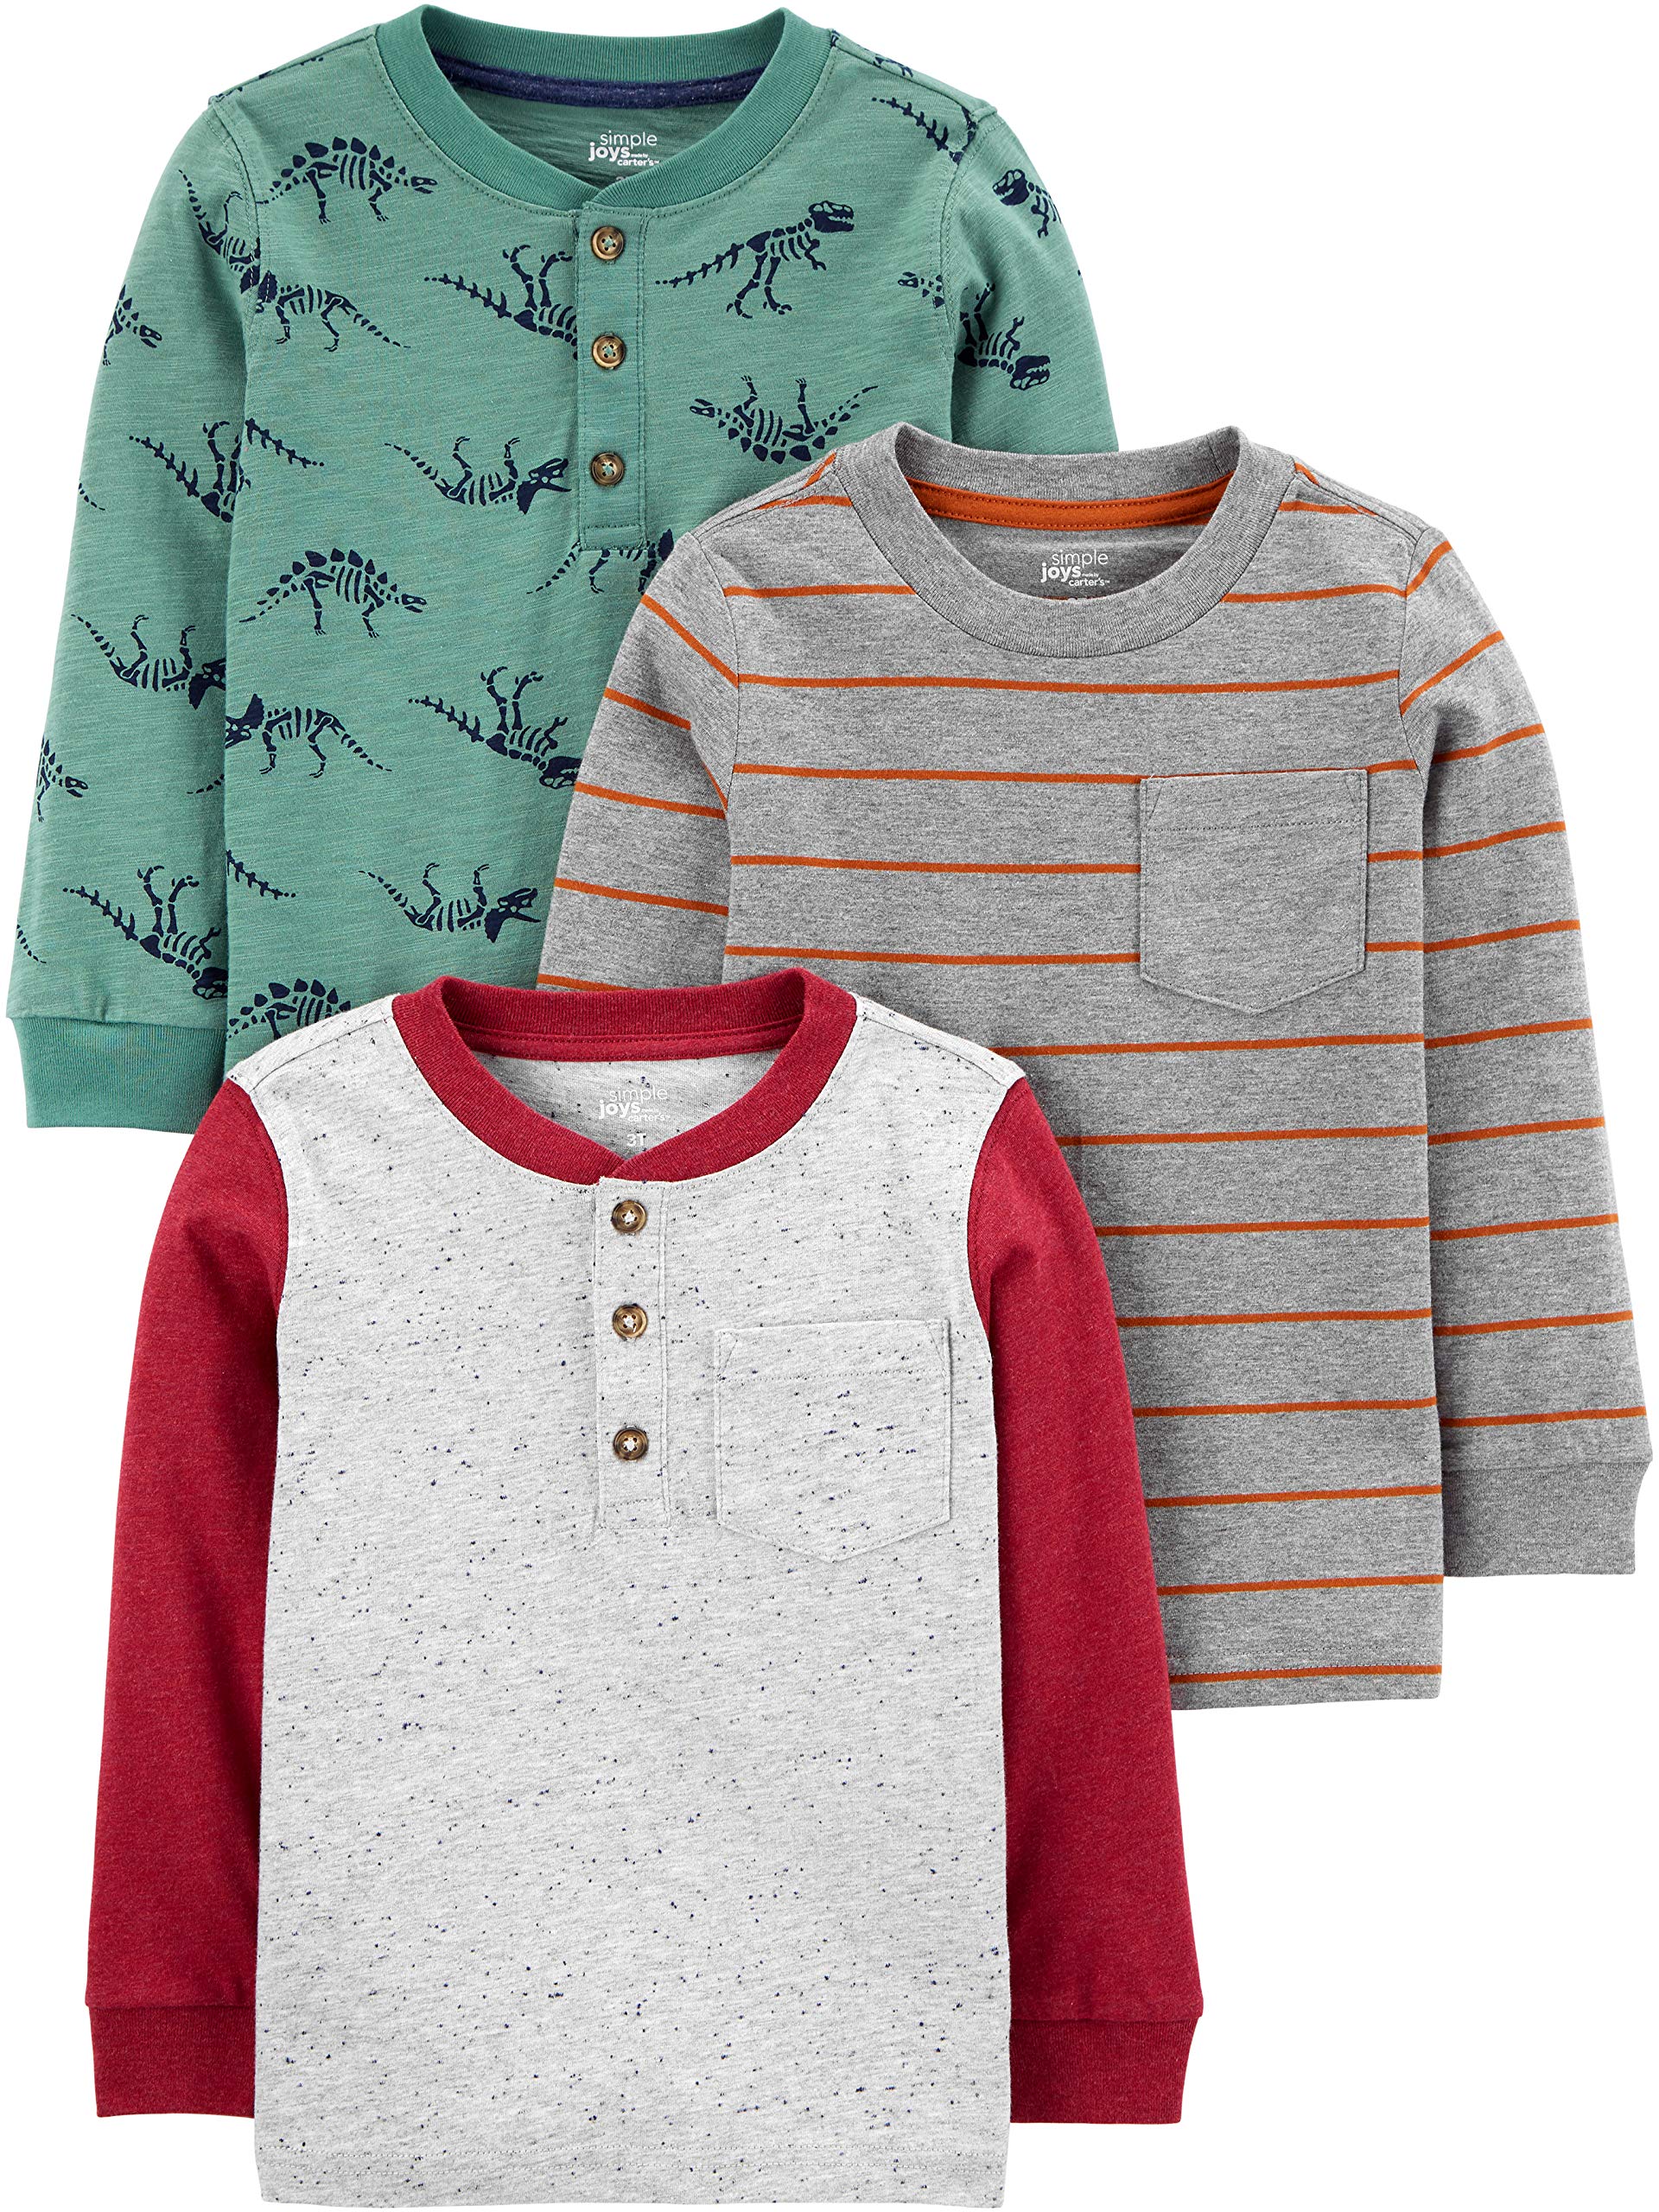 Simple Joys by Carter's Toddler Boys' Long-Sleeve Shirts, Pack of 3, Dinosaur/Stripe, 2T